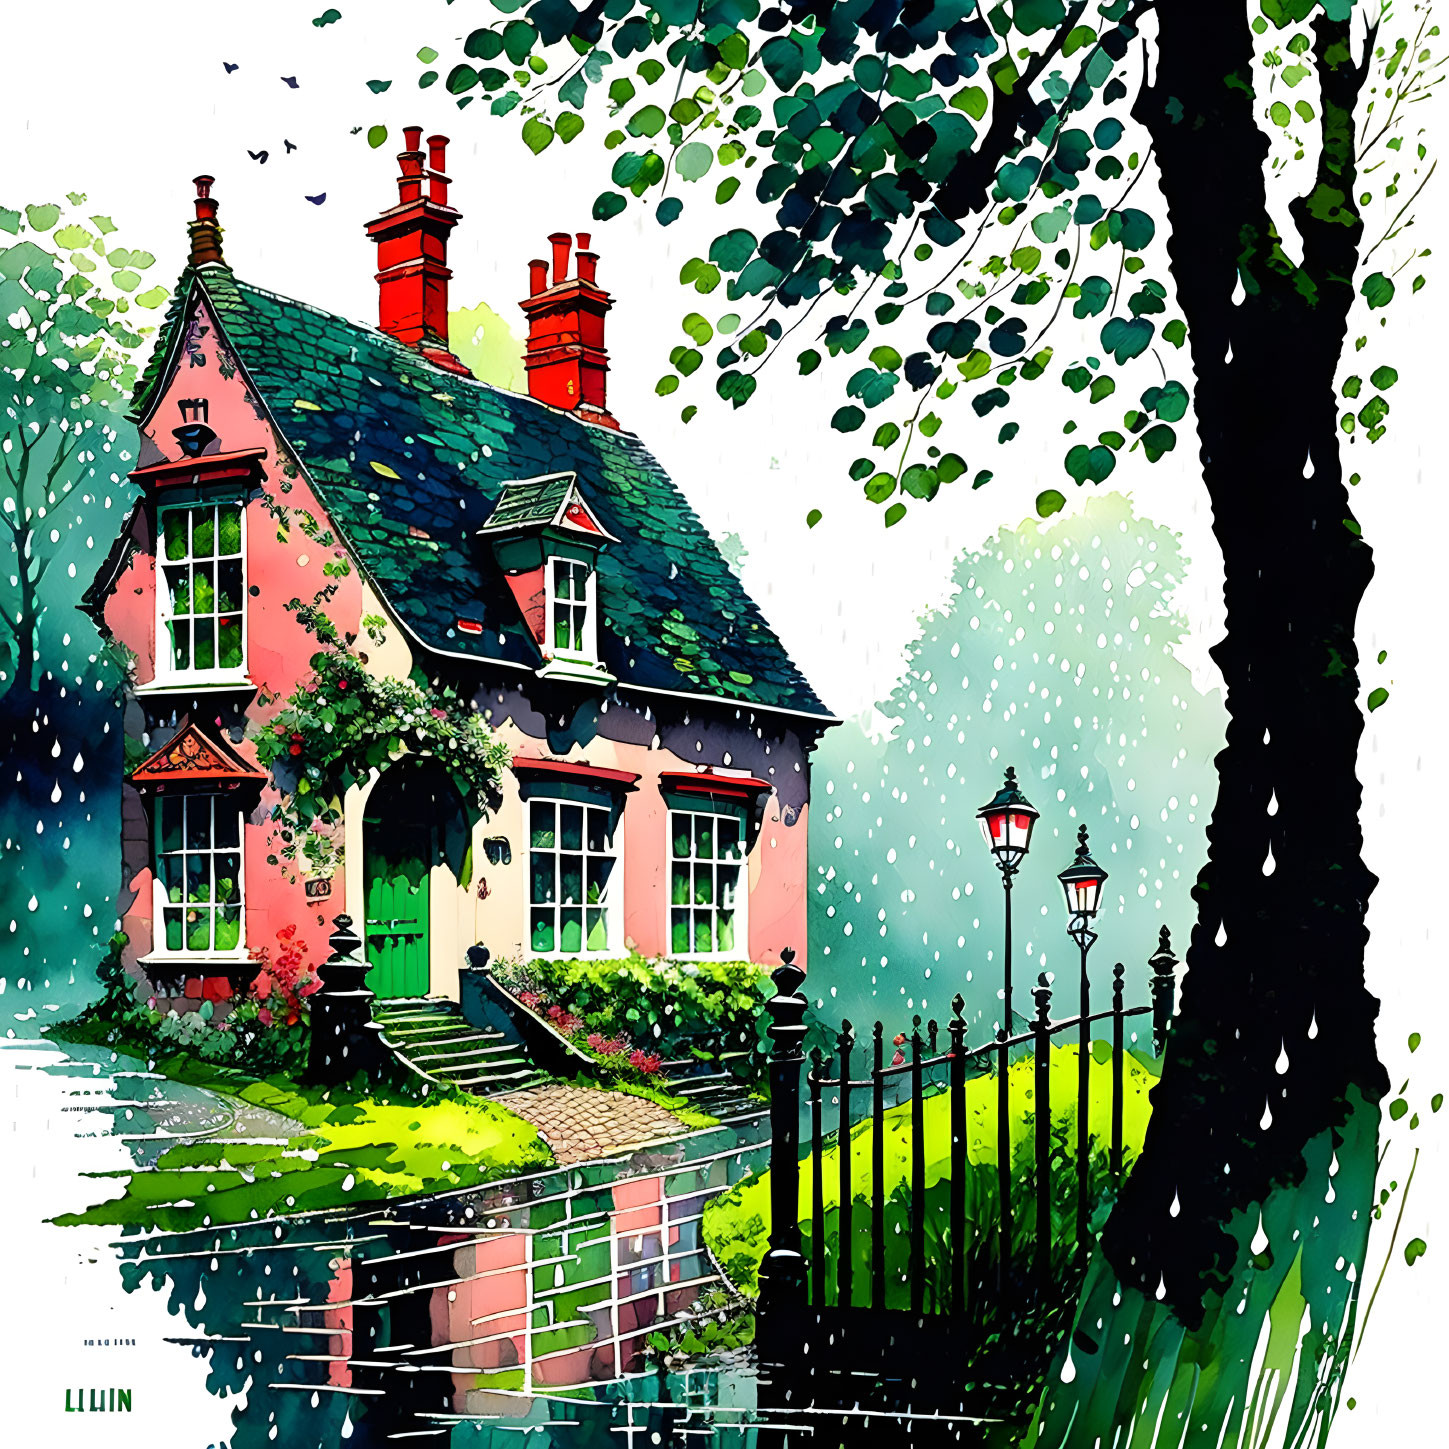 Colorful illustration of pink house with green door and red chimney surrounded by greenery and street lamp